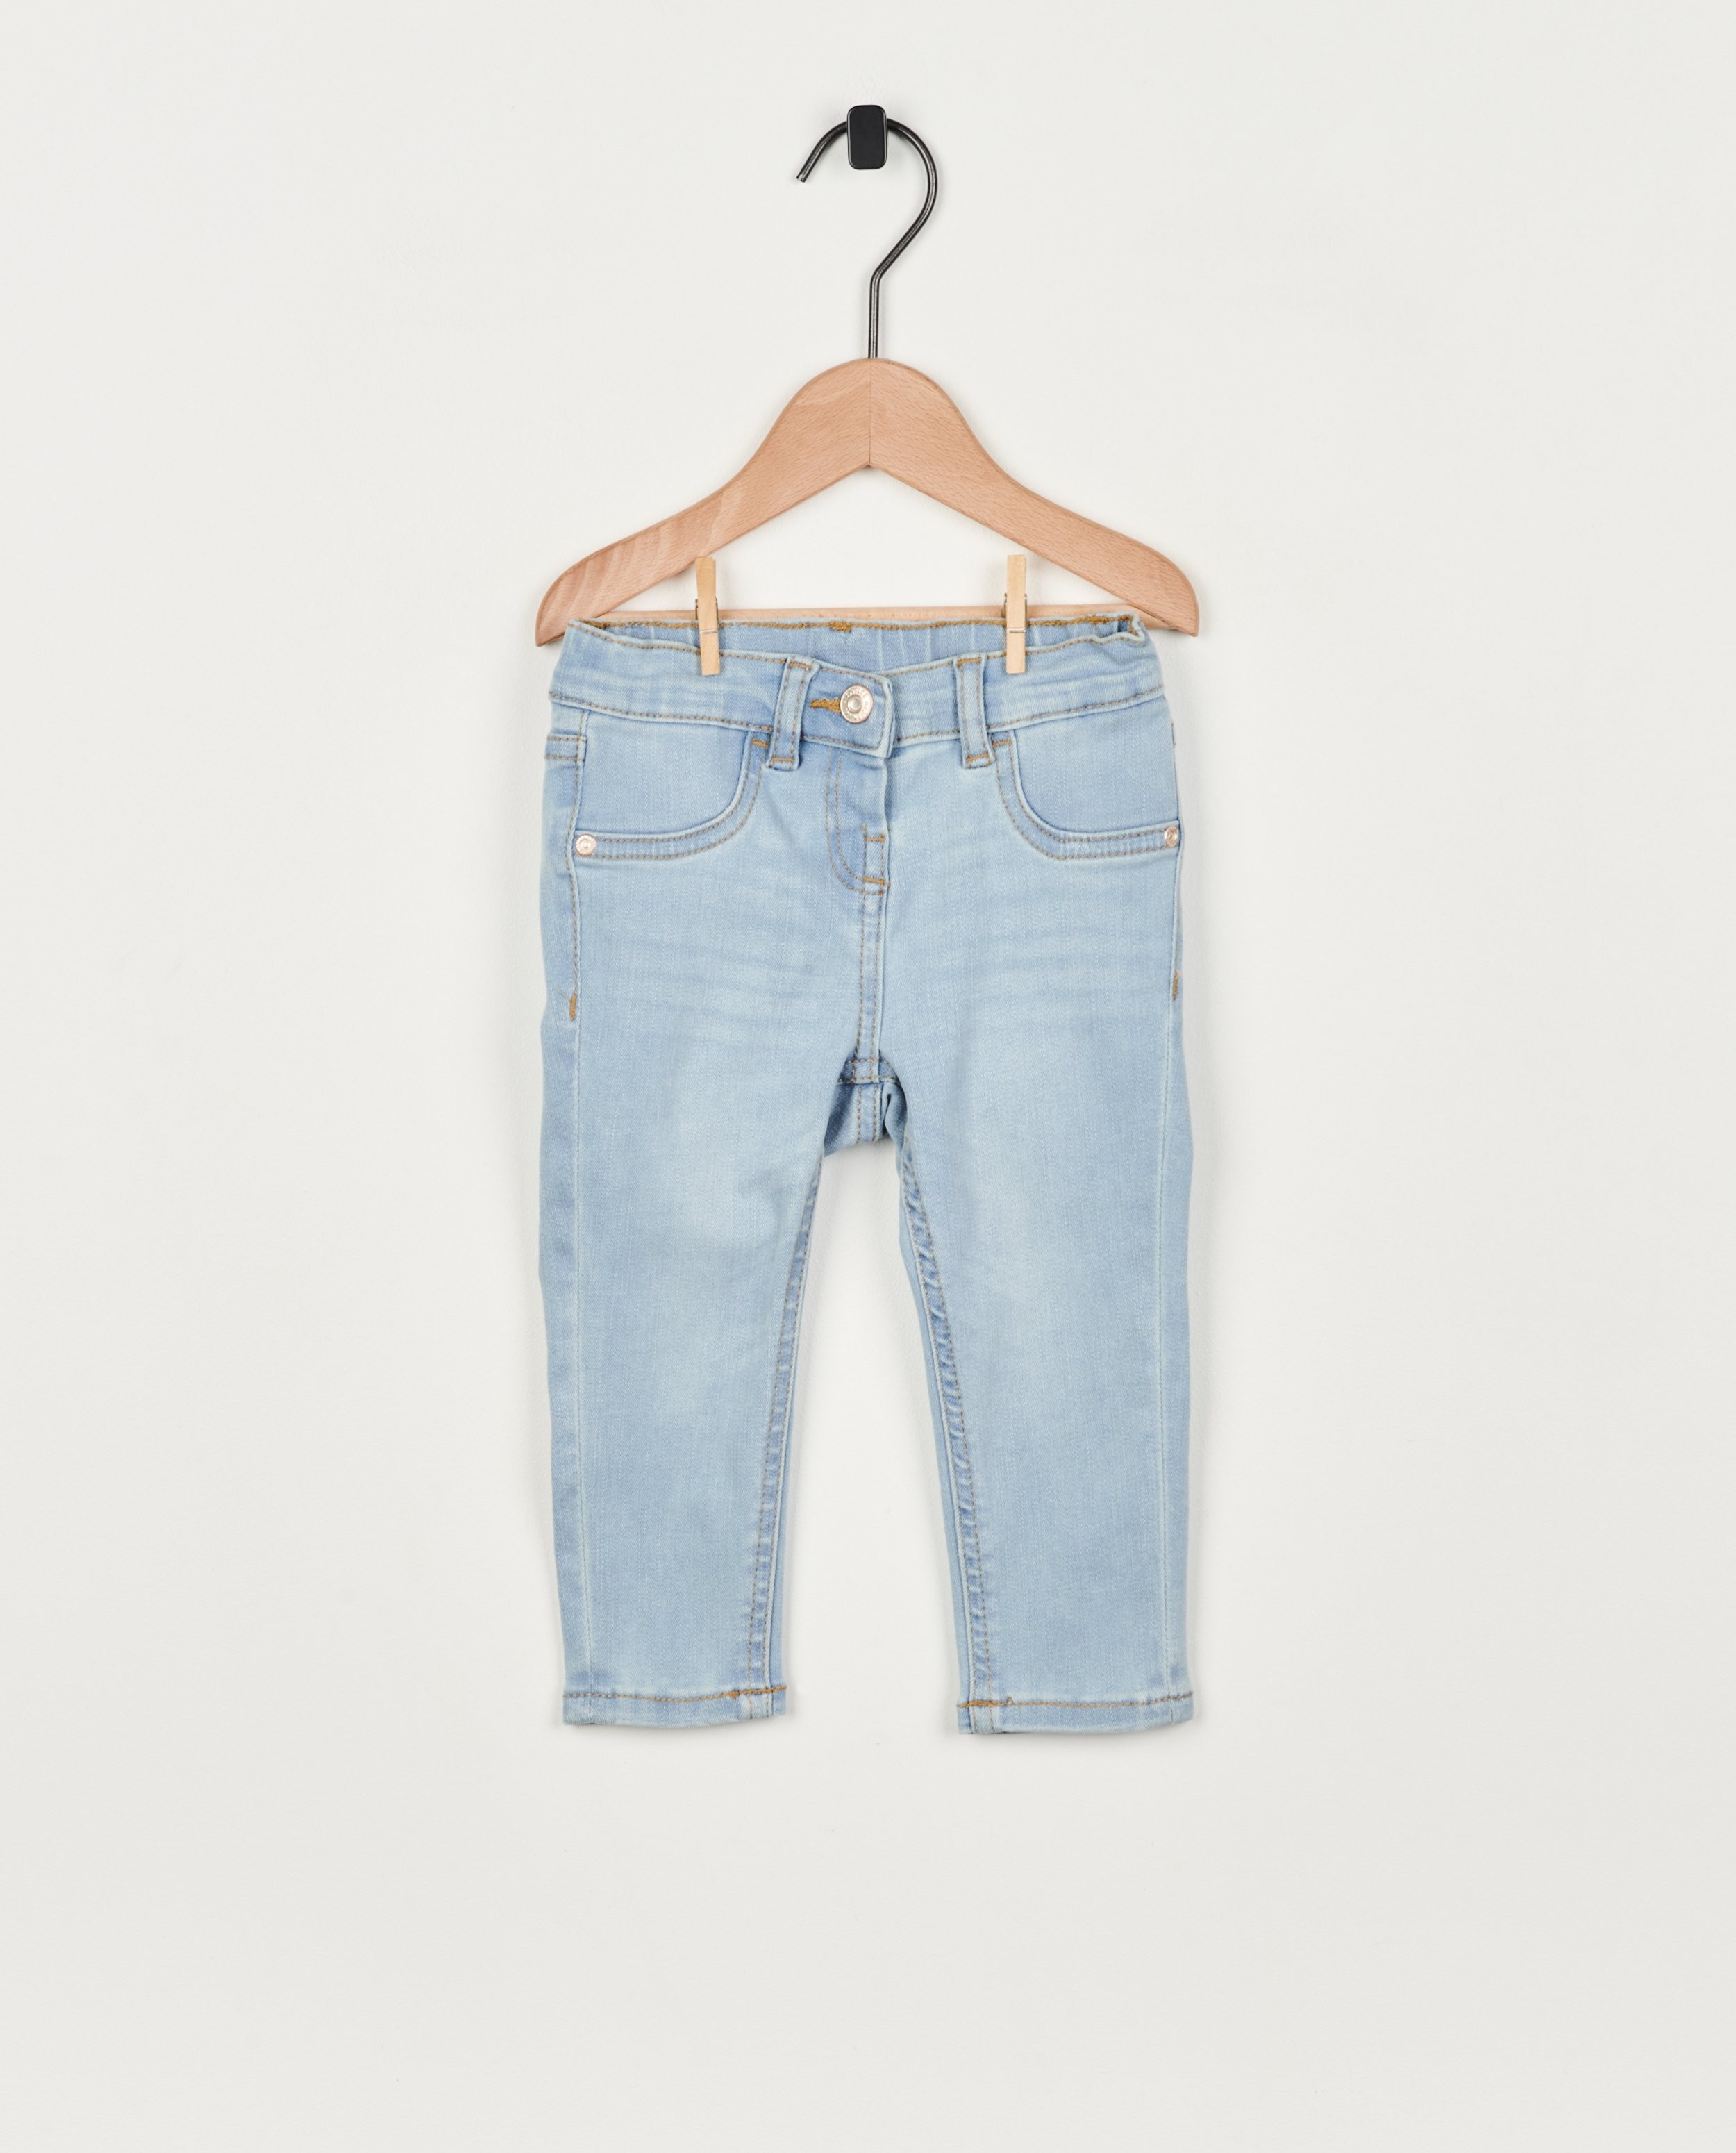 Blauwe jeans, skinny fit - null - Cuddles and Smiles